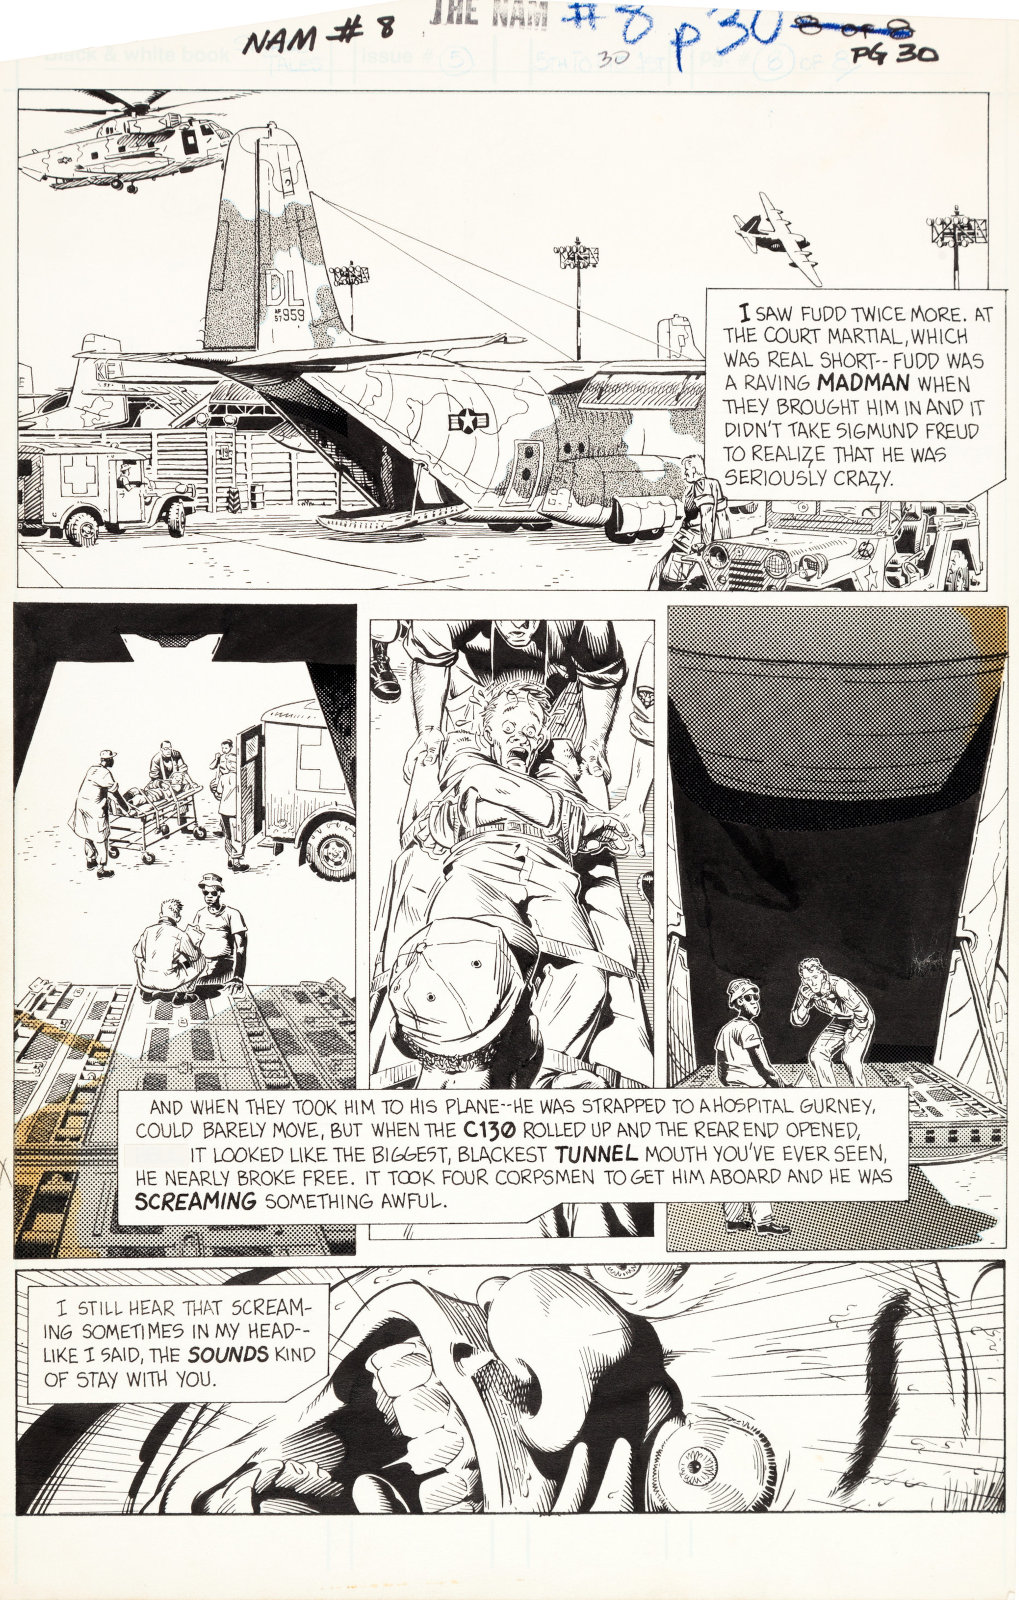 The Nam issue 8 page 8 by Michael Golden